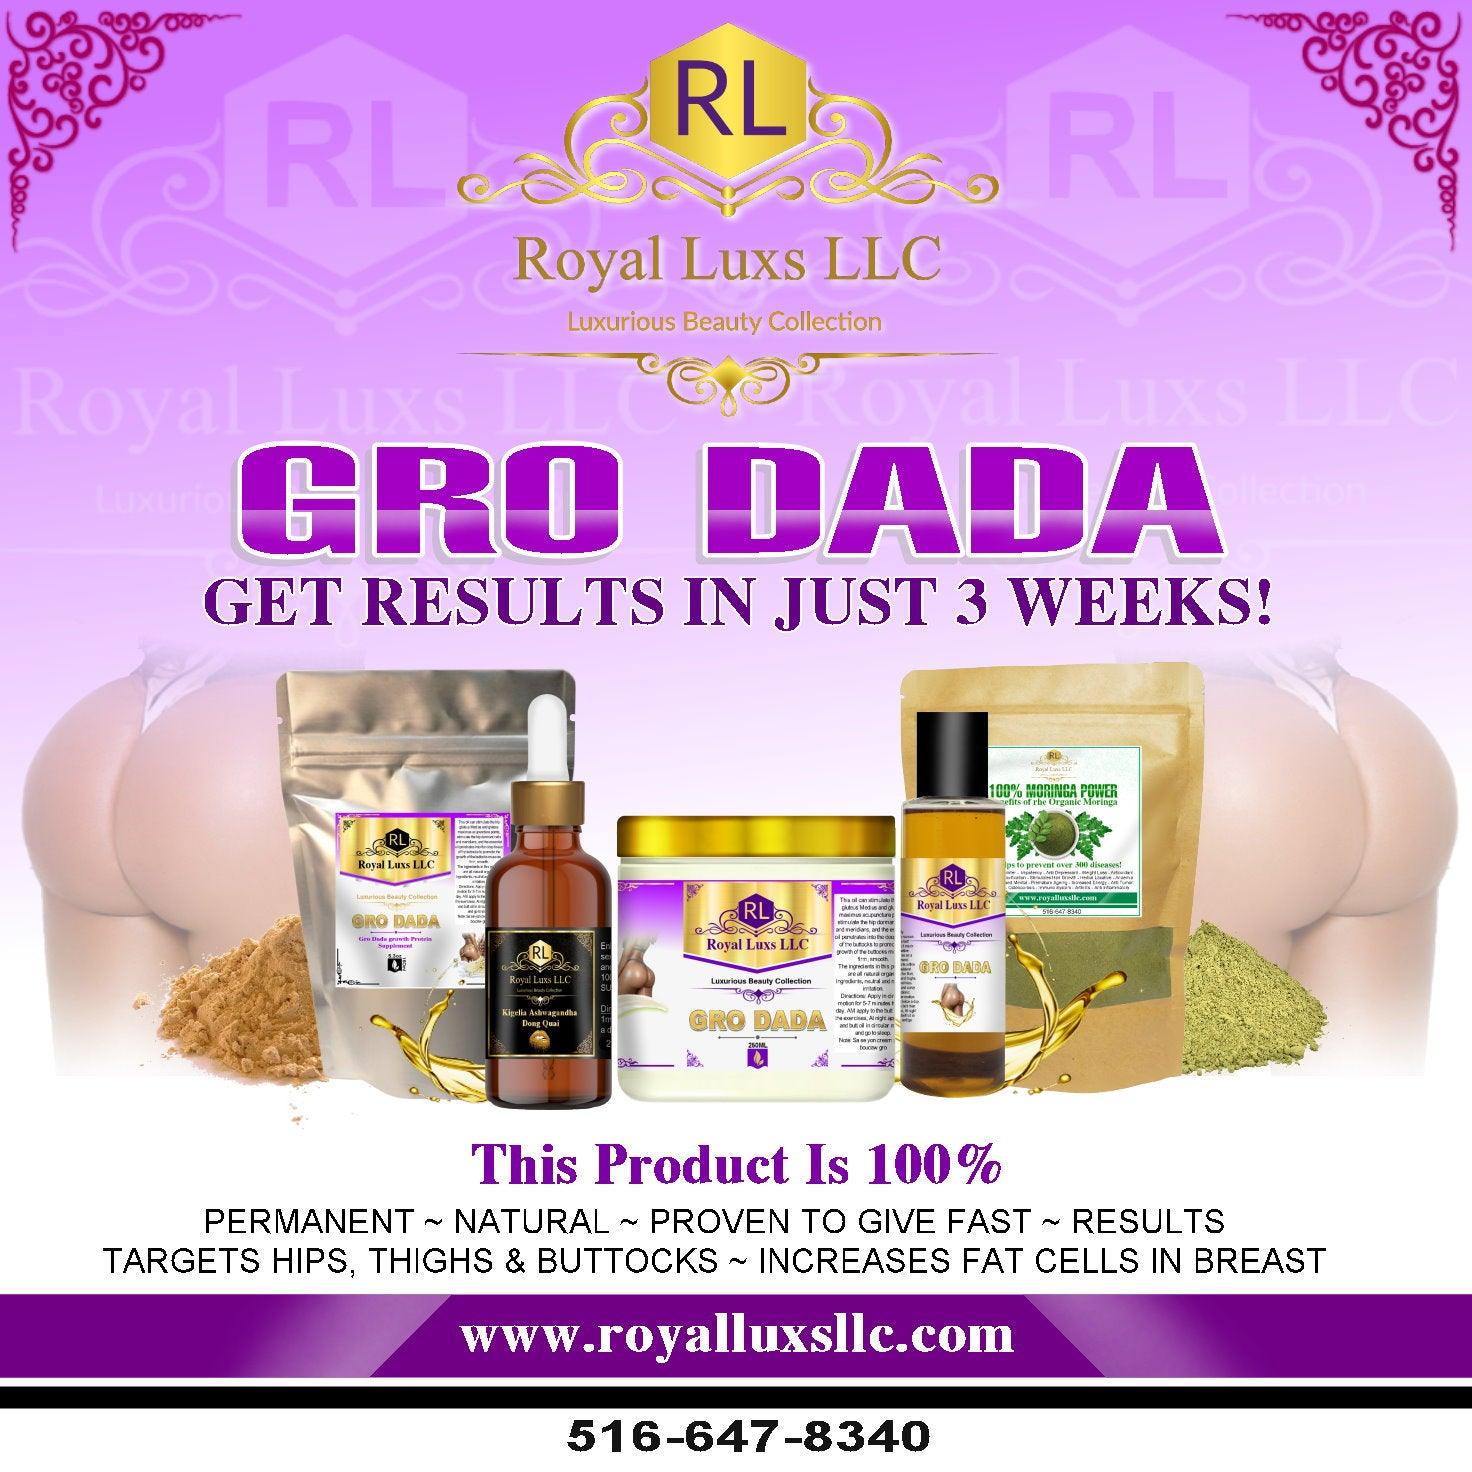 Skip plastic surgery and still get the sexy body of your dreams by using Gro Dada - RoyalLuxsLLC